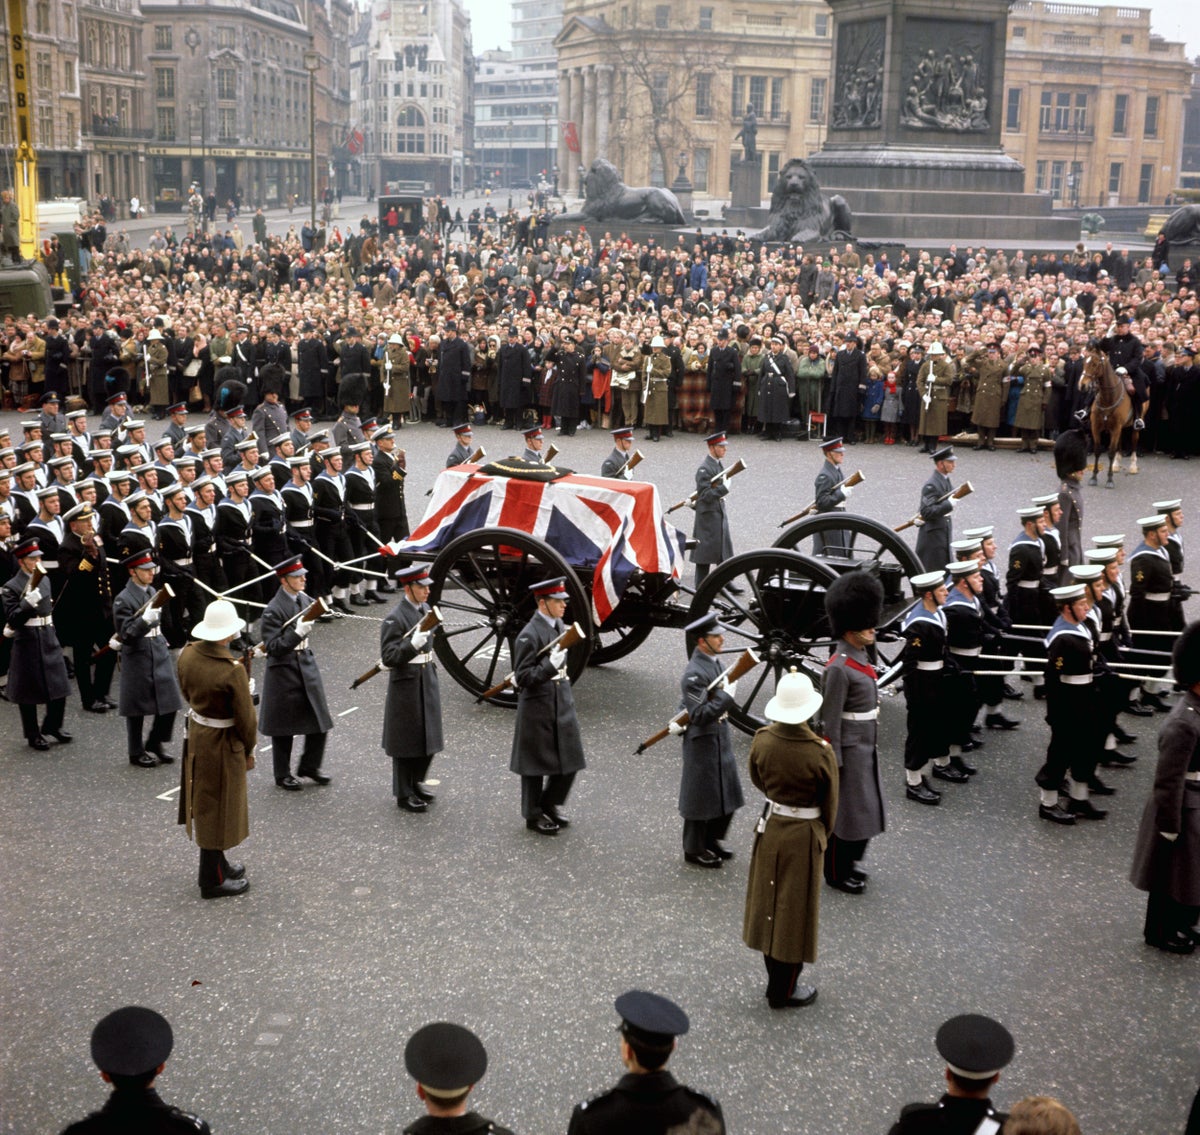 Winston Churchill had last state funeral for non-royal